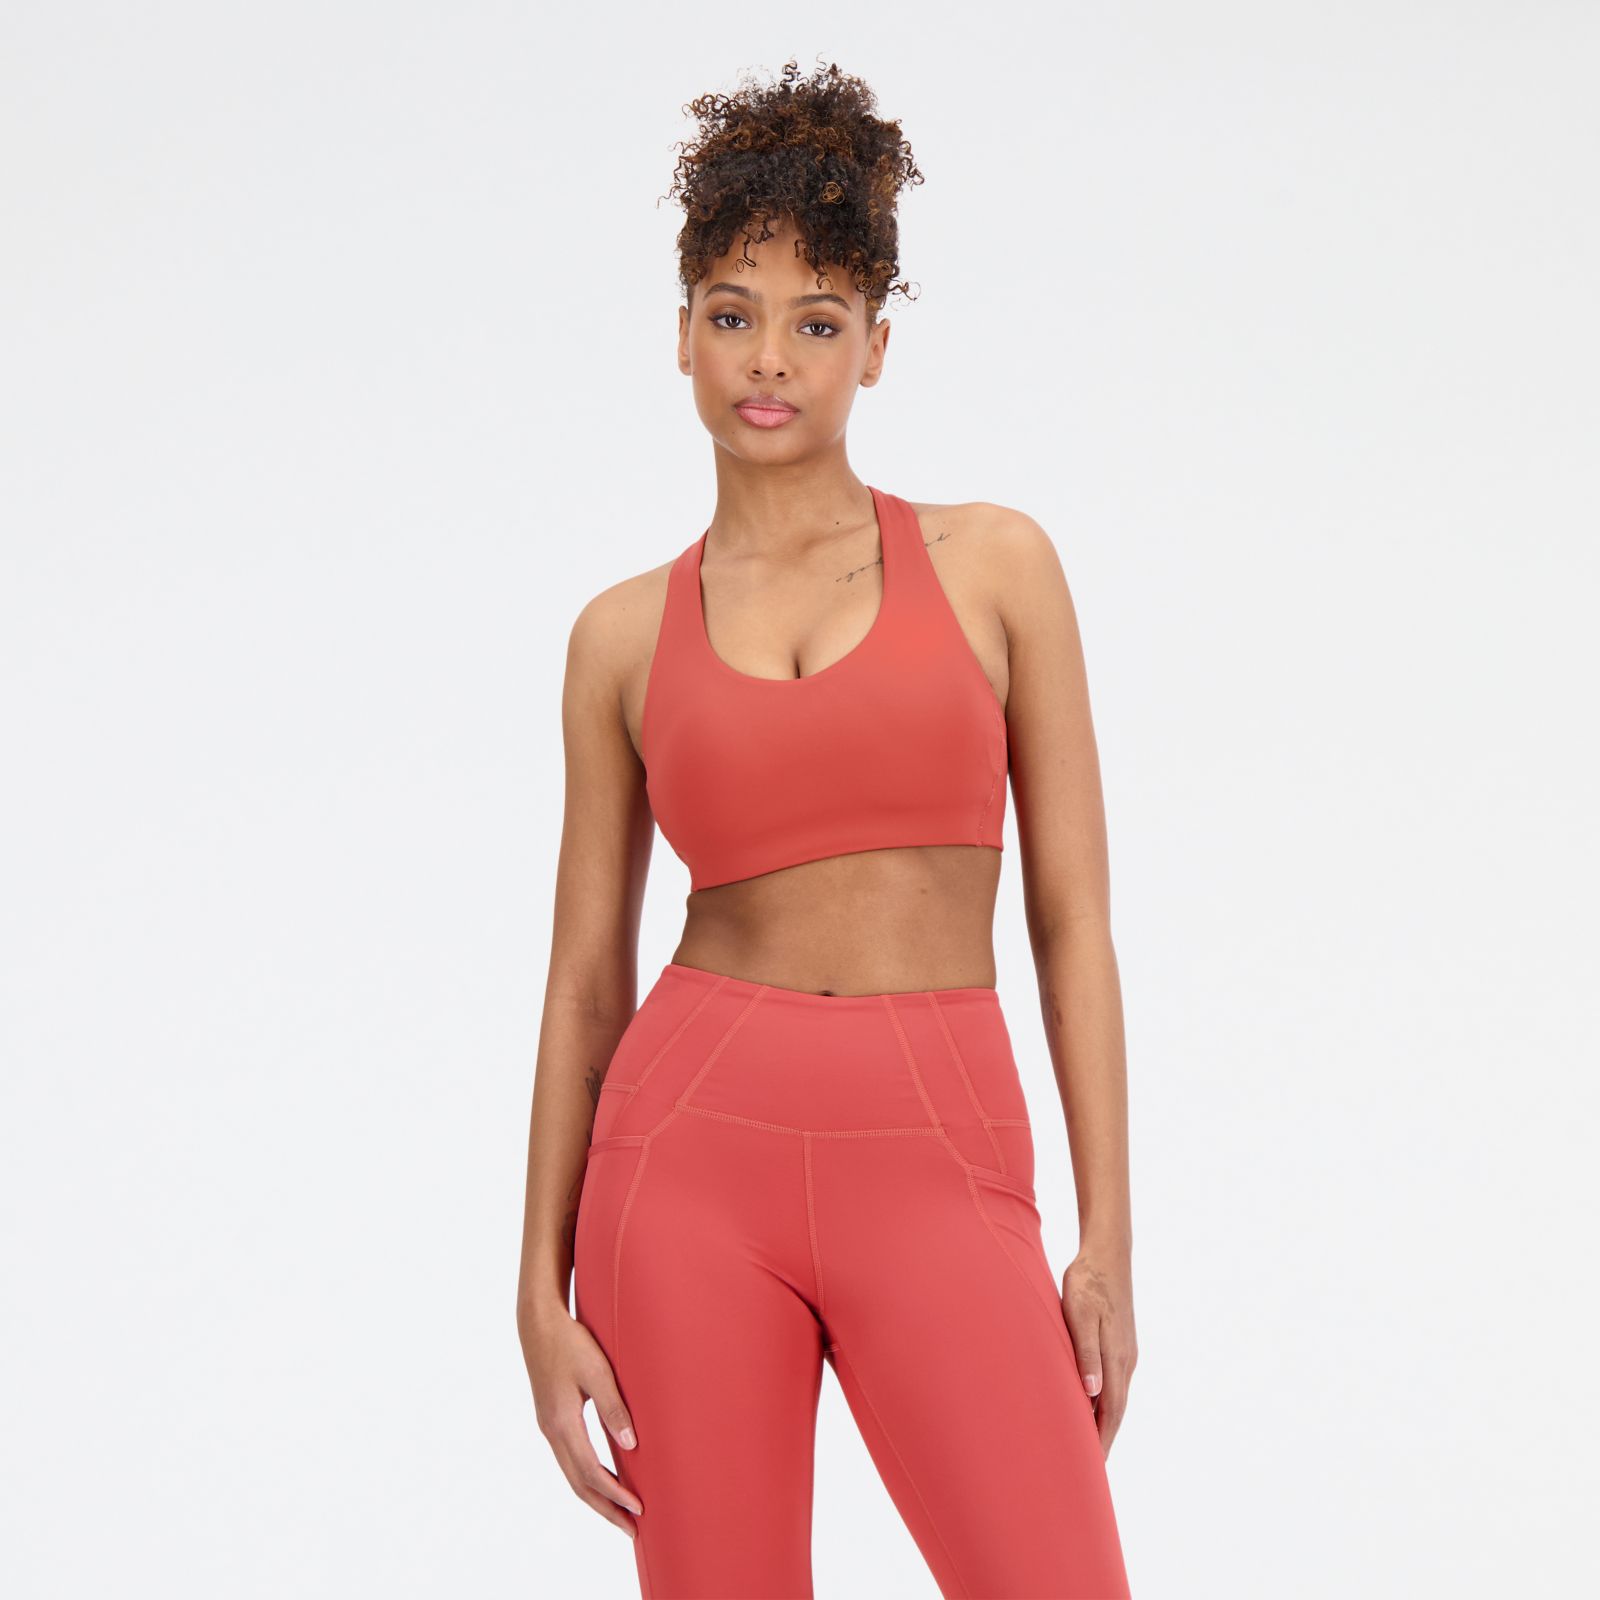  Women's Sports Bras - DD / 44 / Women's Sports Bras / Women's  Bras: Clothing, Shoes & Jewelry